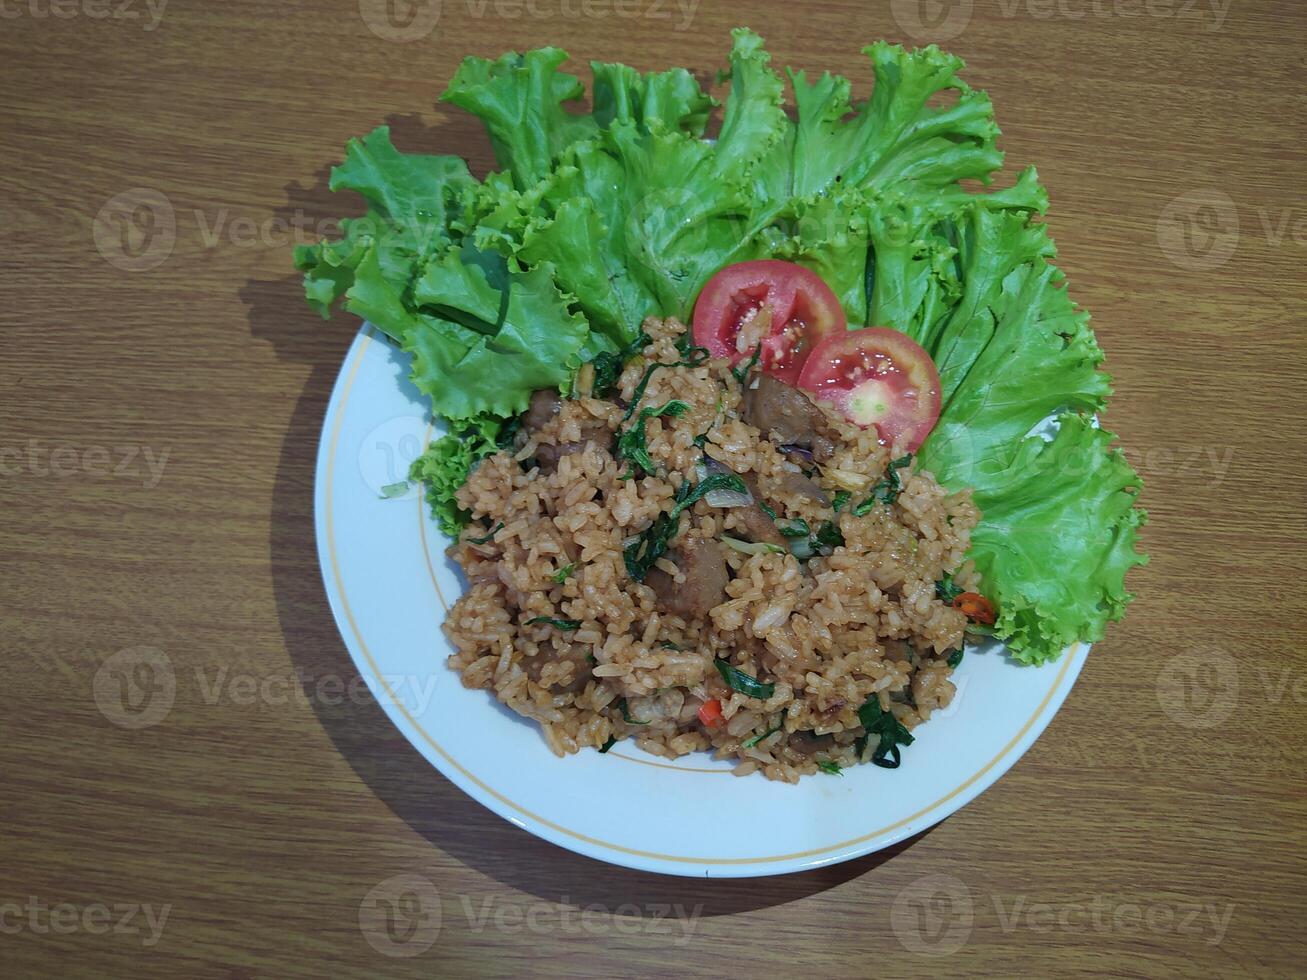 Delicious Indonesian fried rice nasi goreng with lots of lettuce, mustard greens and tomatoes served on a white plate photo